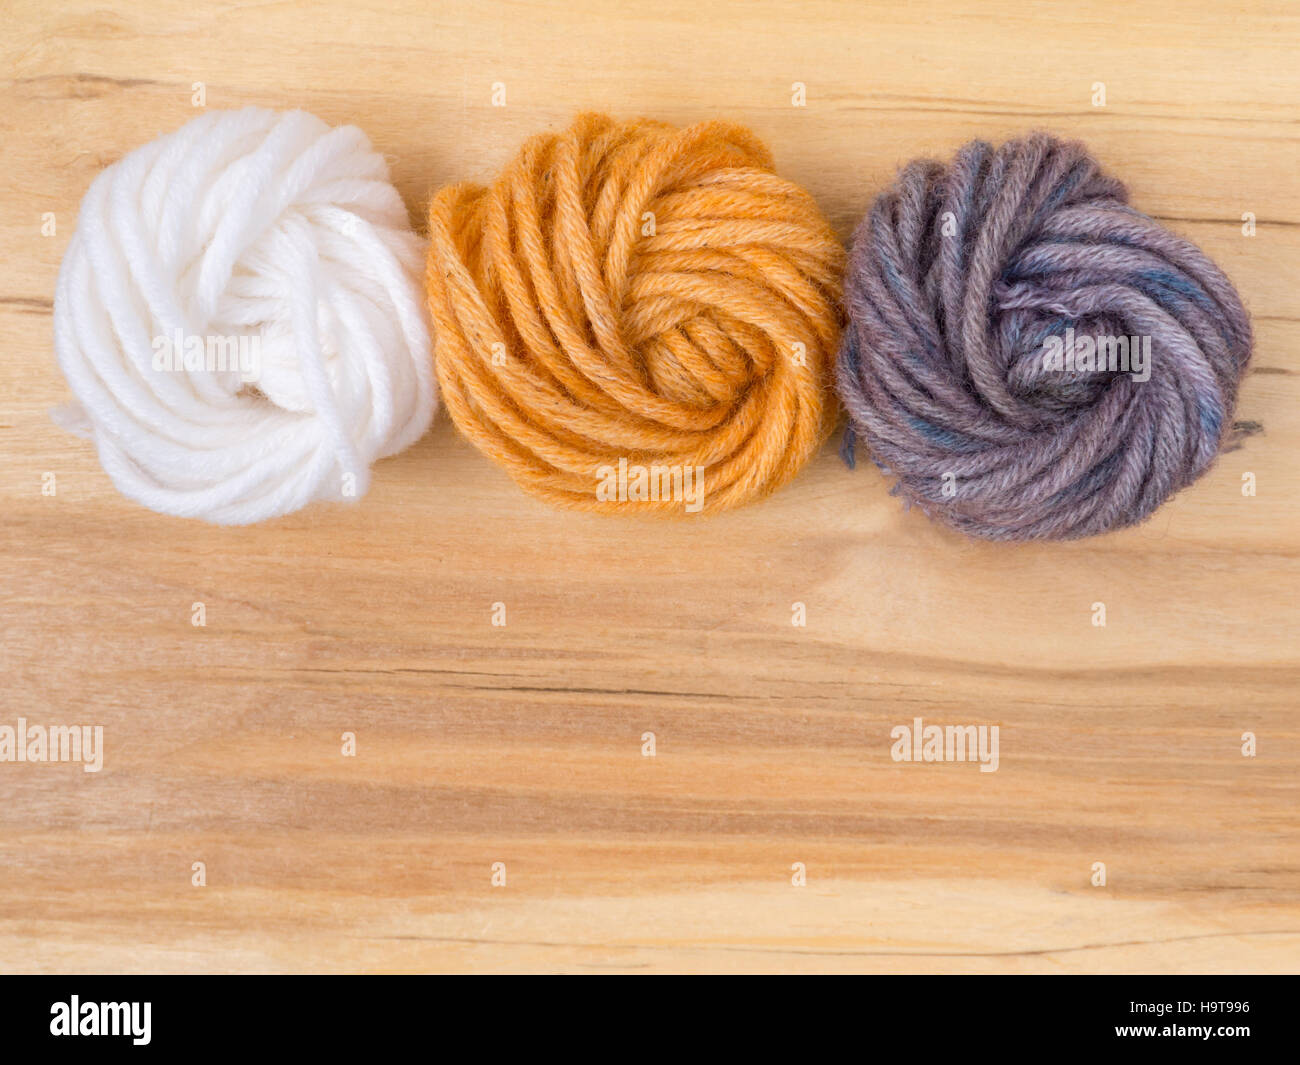 Wool bun swatches colored by henna and indigo and control white sample Stock Photo